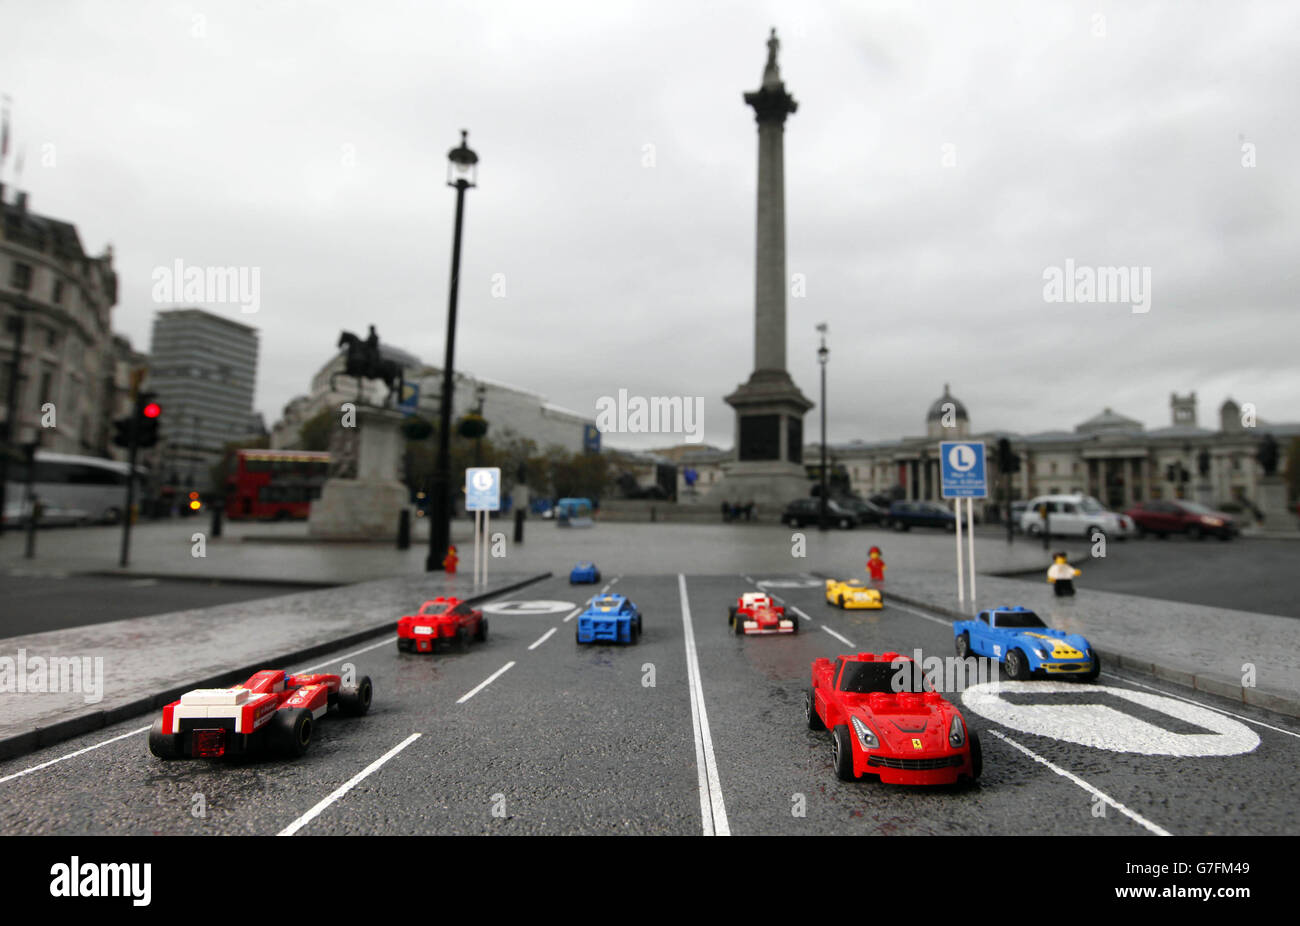 A model Ferrari F138, from the new Shell V-Power LEGO Collection, uses the  specially designed congestion lane for LEGO cars in Trafalgar Square in  London Stock Photo - Alamy